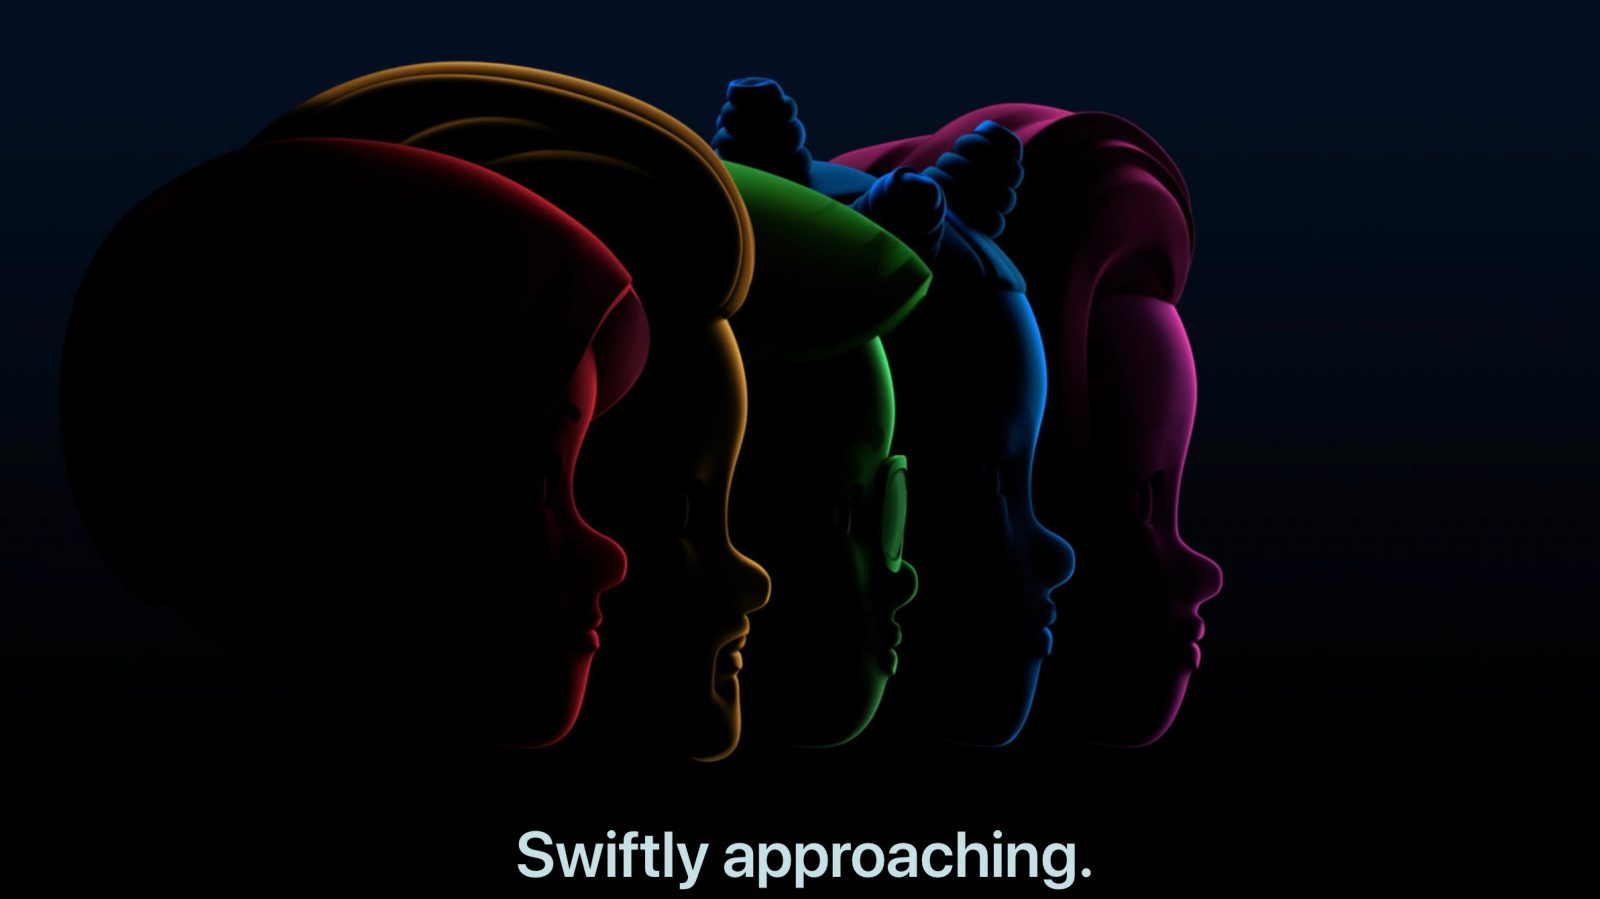 Apple confirms full WWDC 2022 schedule and keynote for June 6: ‘Swiftly approaching’